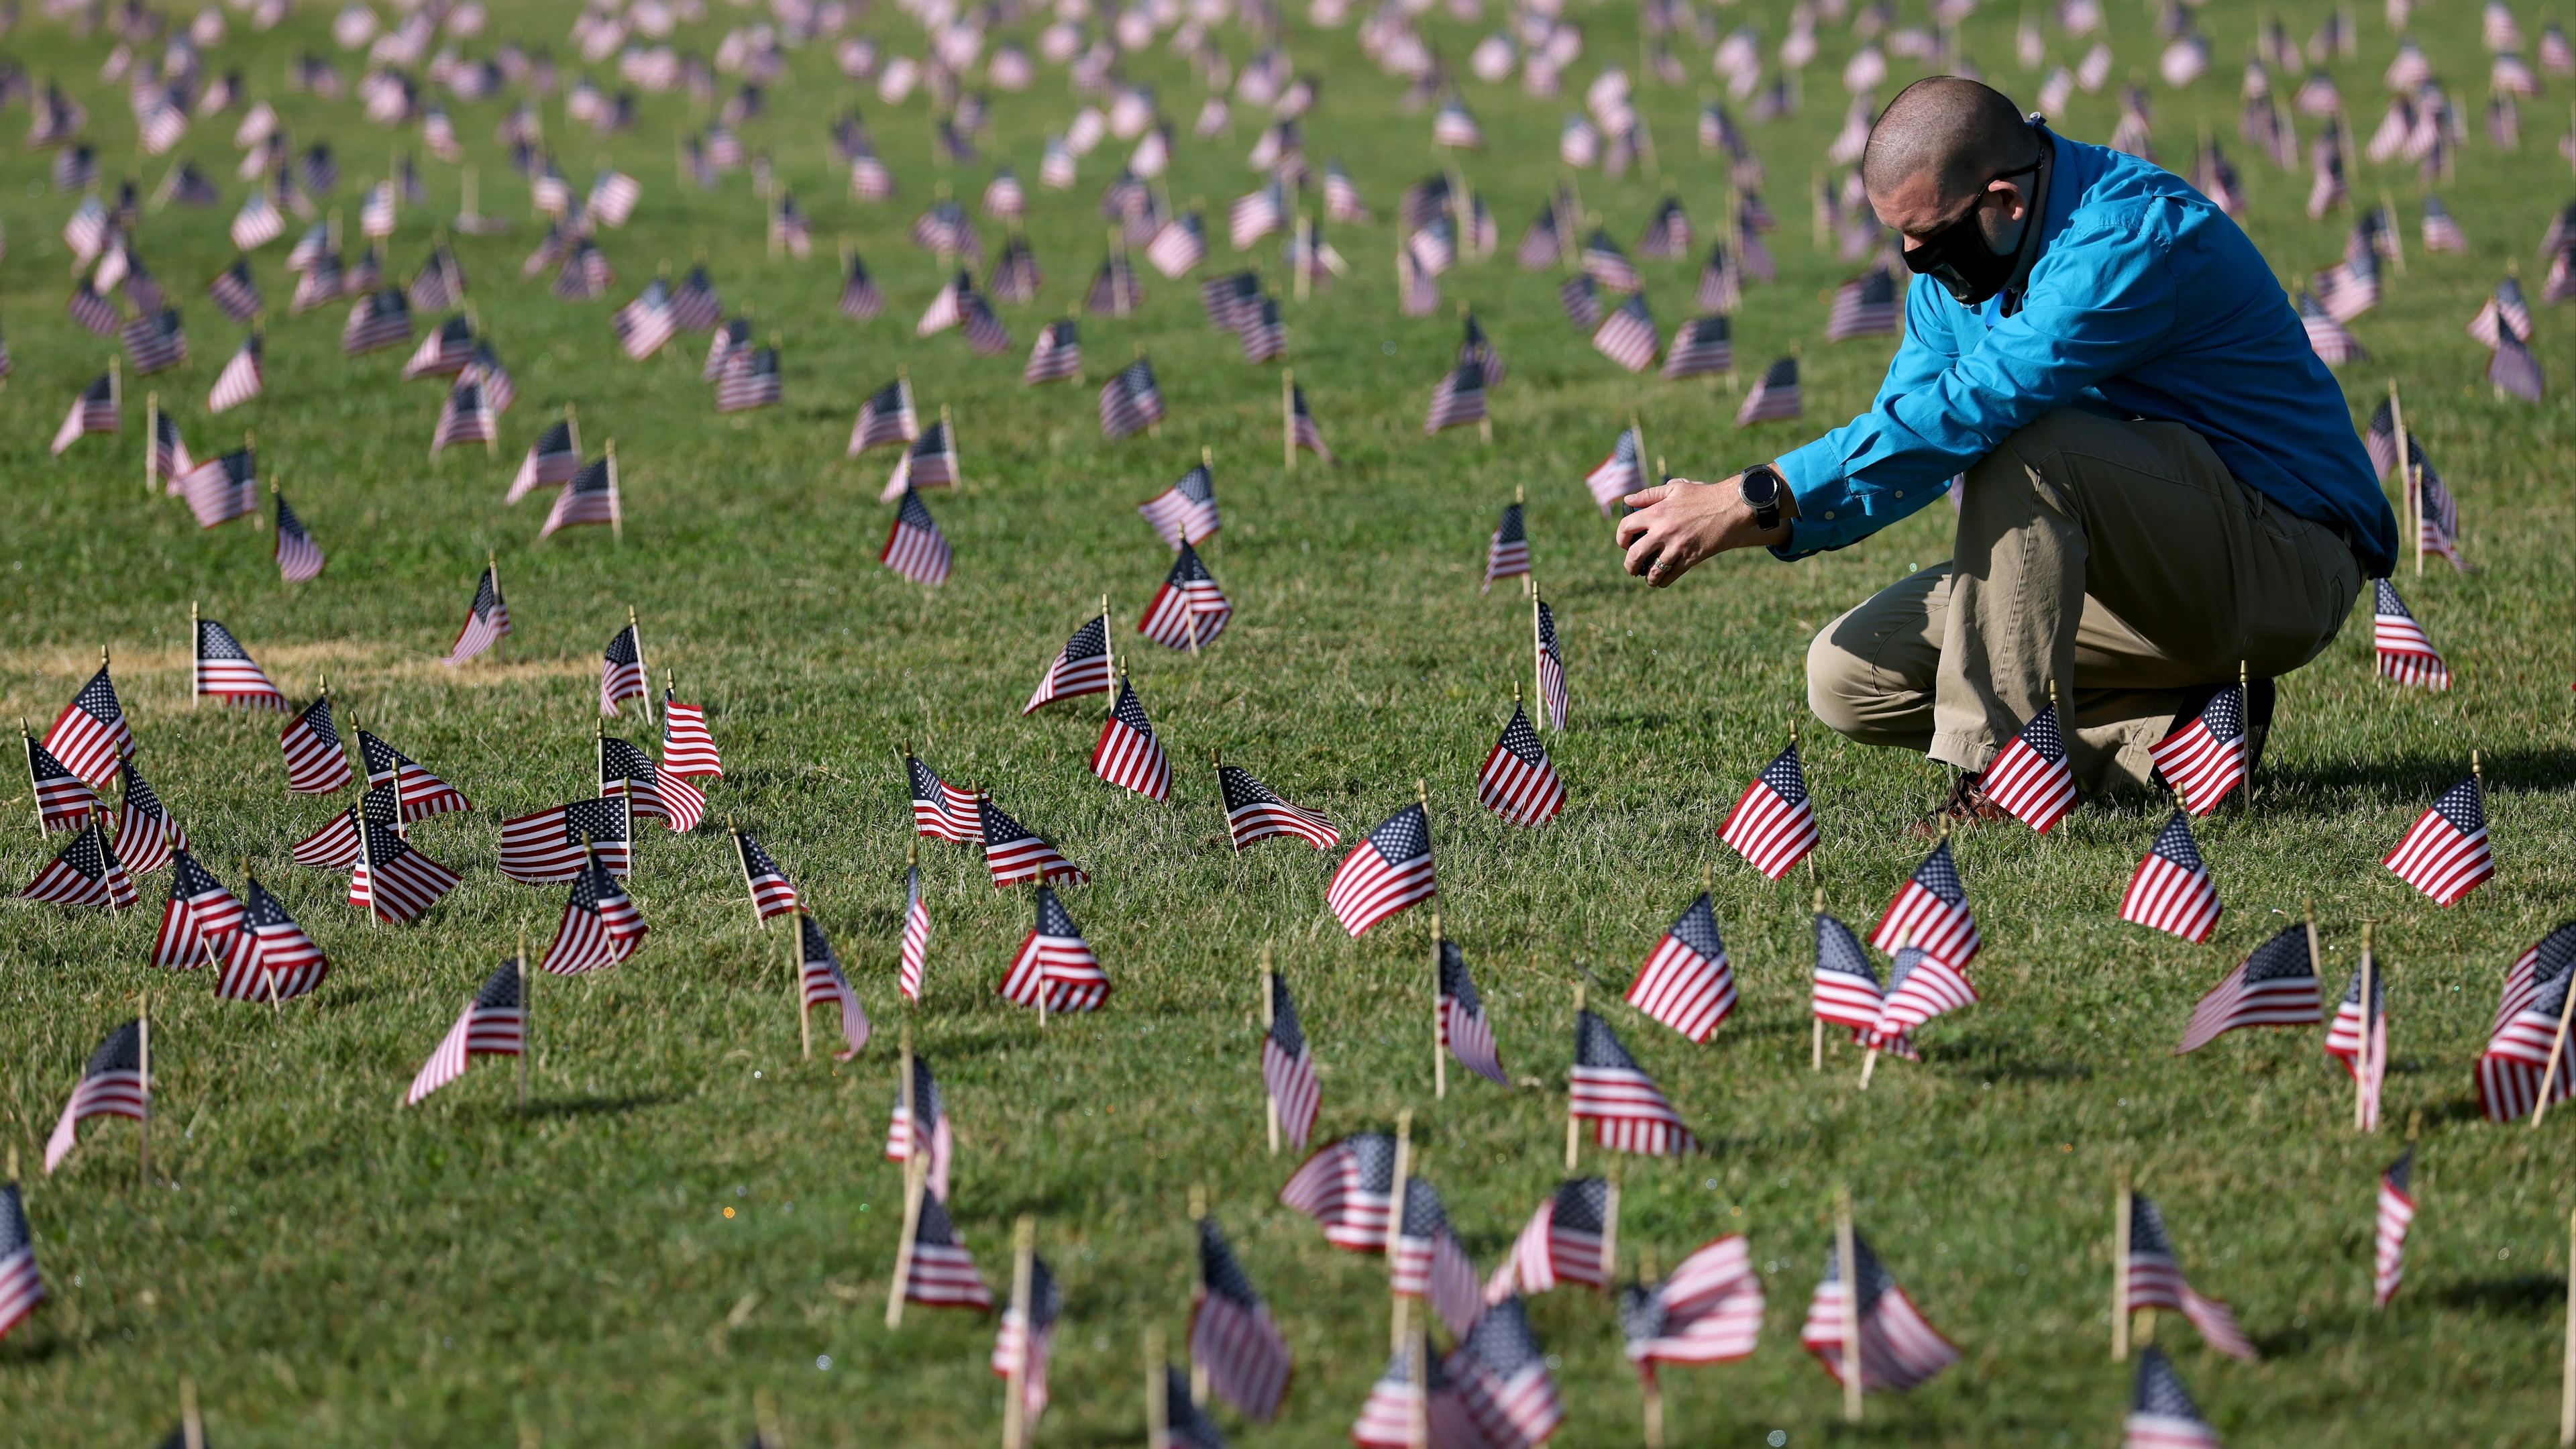 Chris Duncan, whose 75 year old mother Constance died from COVID on her birthday, photographs a COVID Memorial Project installation of 20,000 American flags on the National Mall as the United States crosses the 200,000 lives lost in the COVID-19 pandemic